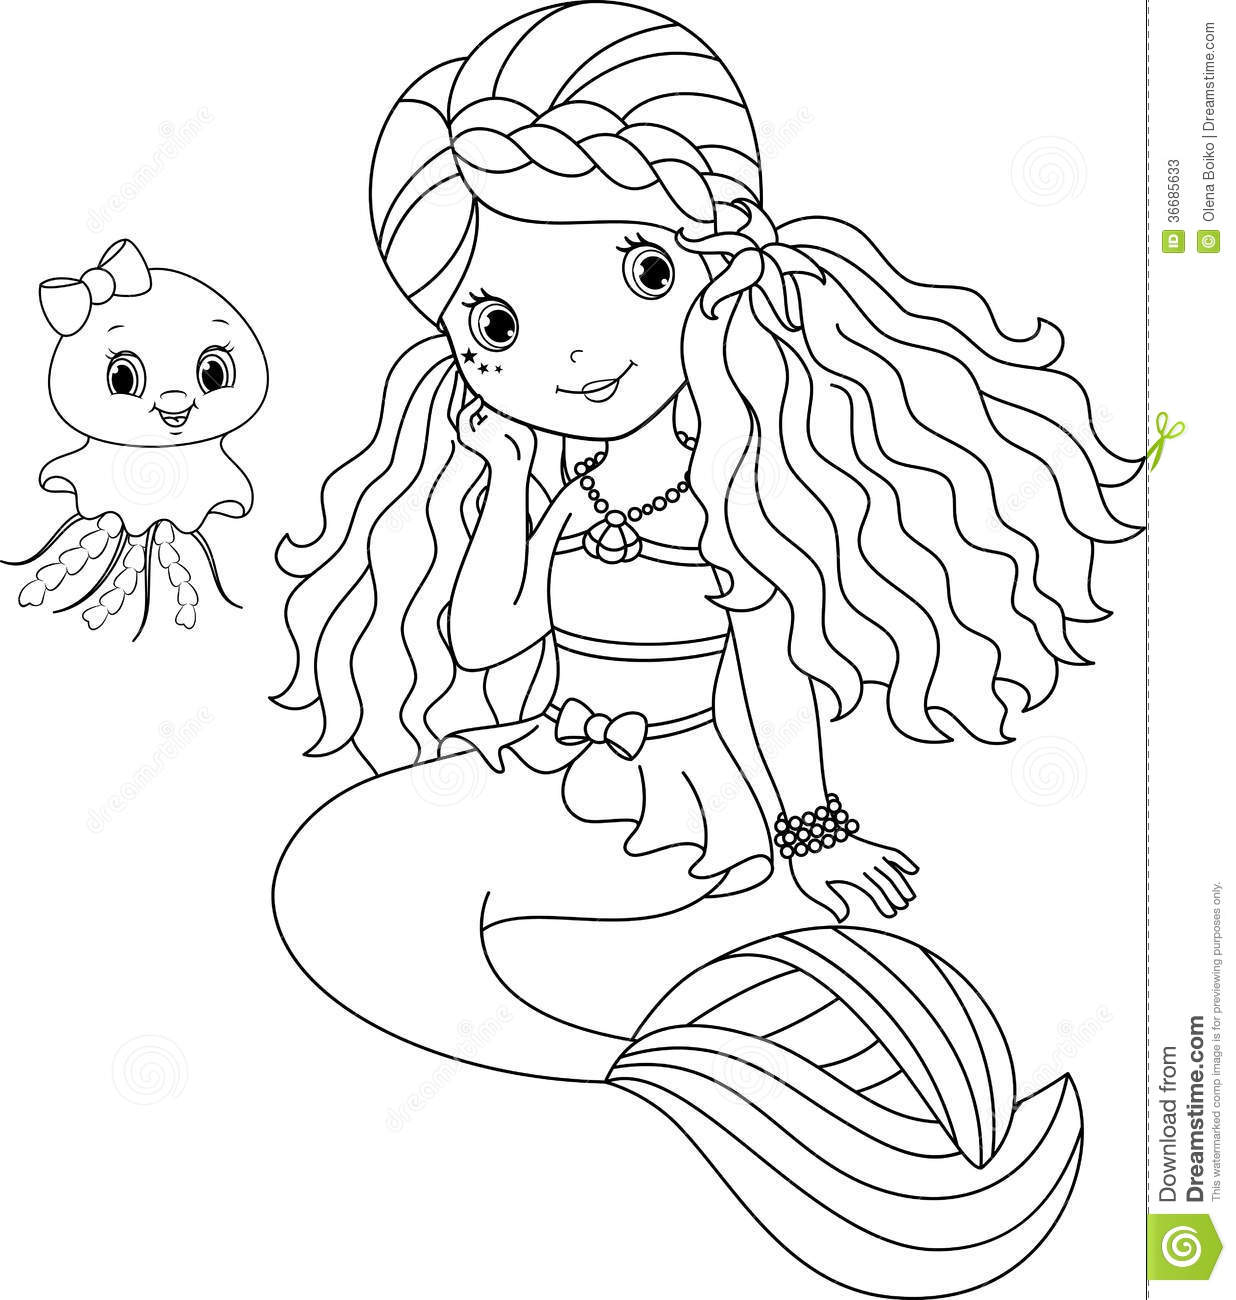 Free Ariel Coloring Pages Free Mermaid Coloring Pages At Getdrawings Free For Personal